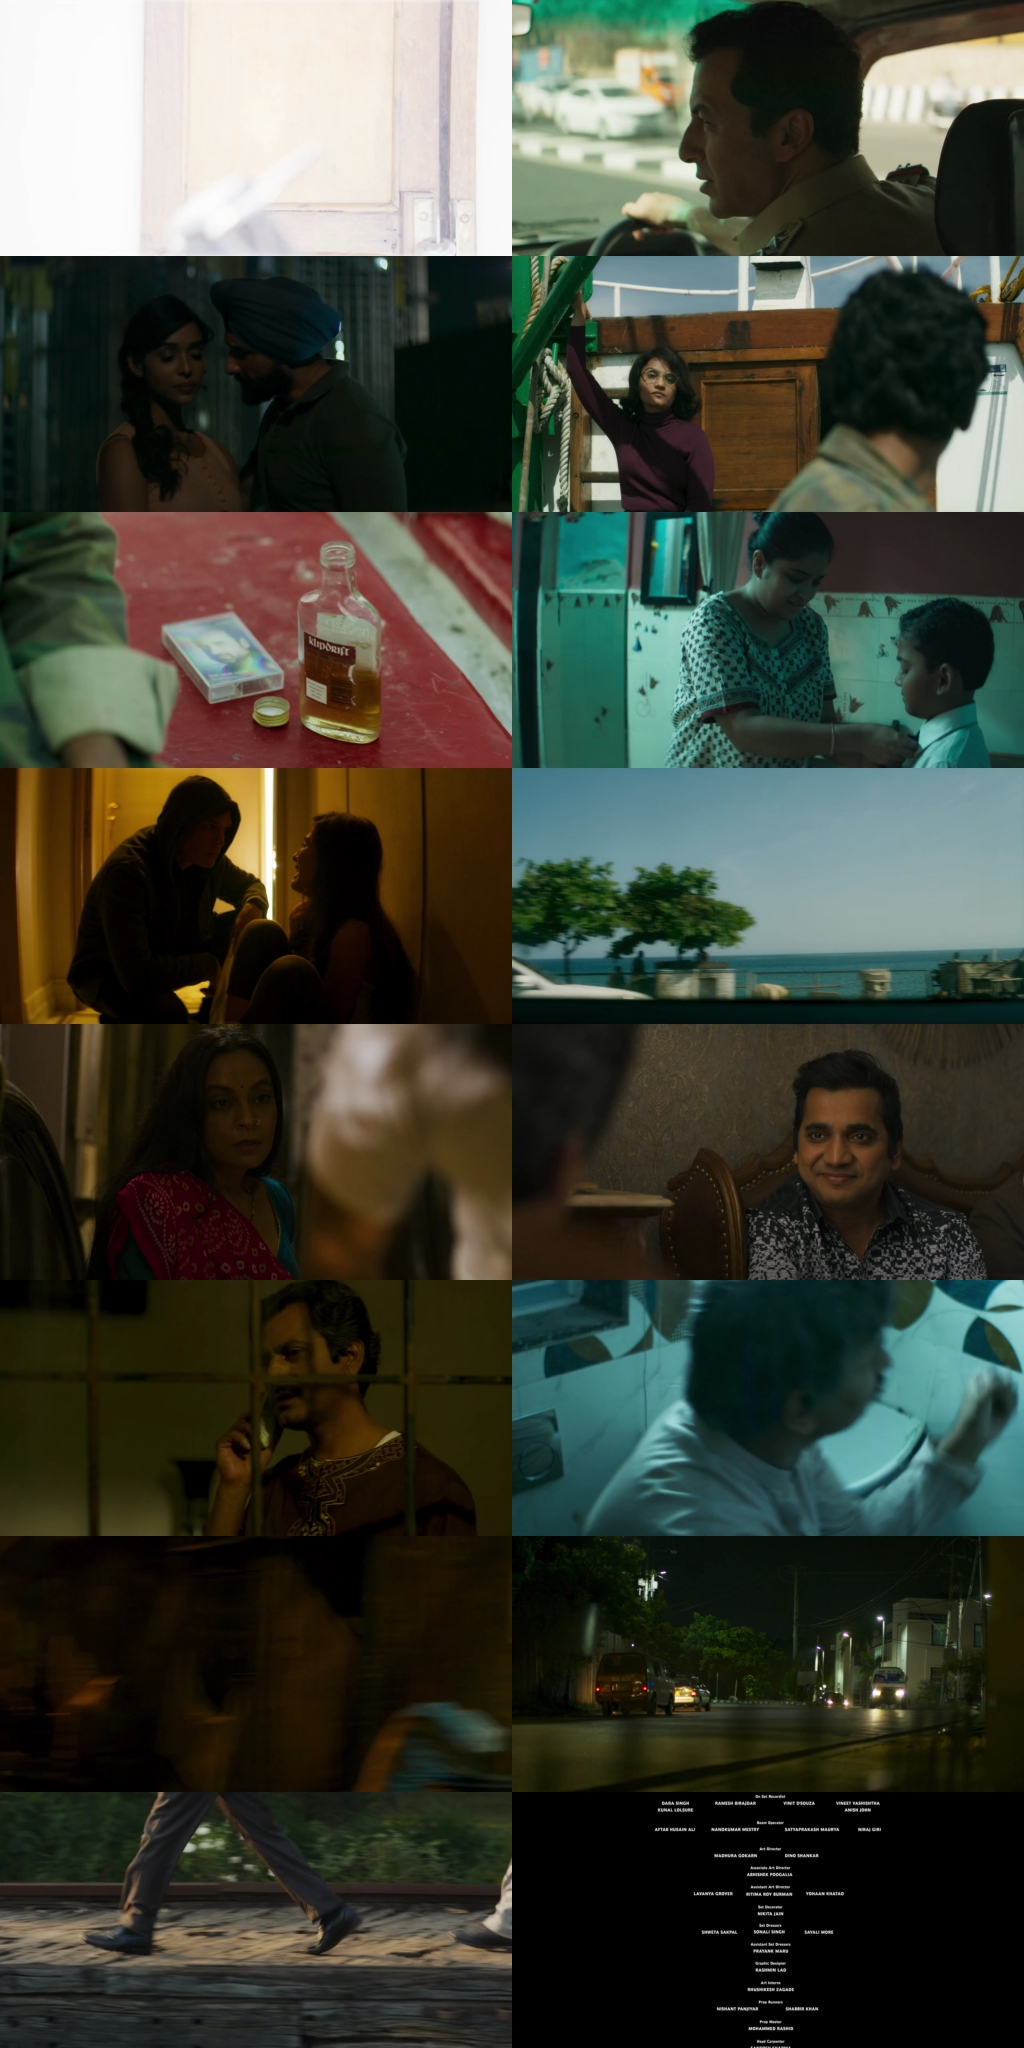 Sacred Games 2019 S02 Complete Hindi Dual Audio 1080p 720p 480p Web-DL MSubs